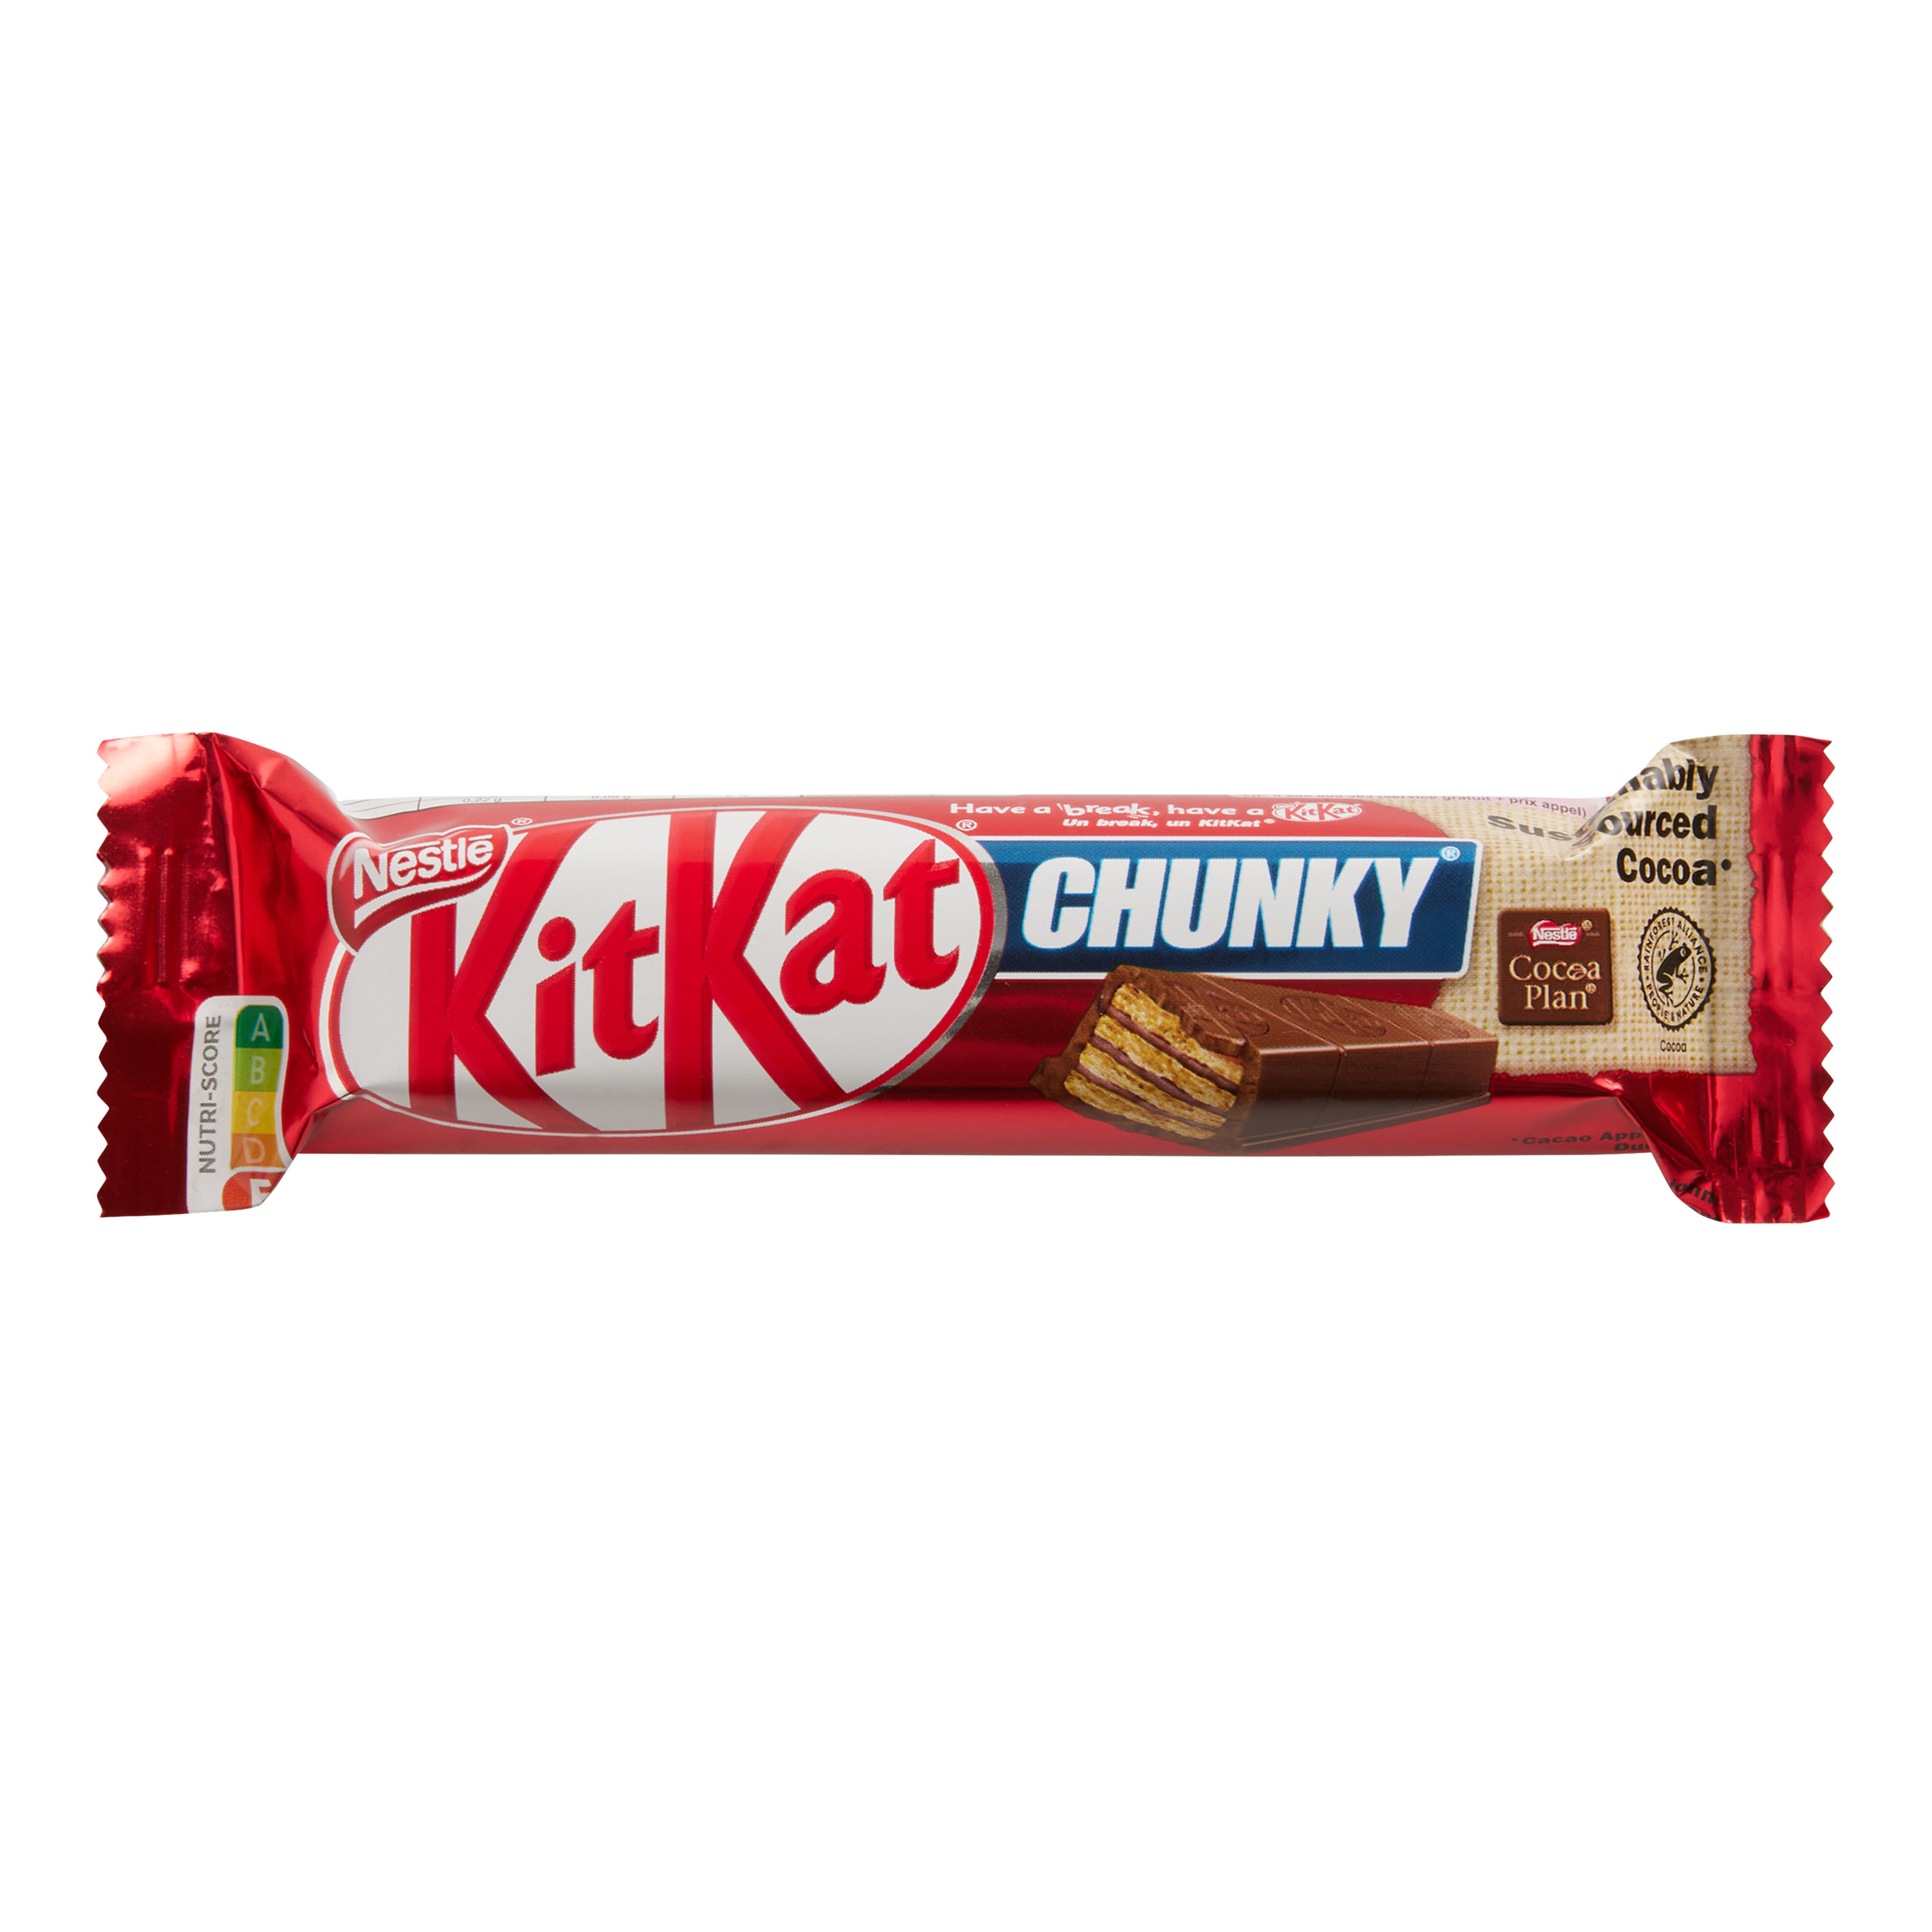 Kit Kat bars are made with ground-up Kit Kats